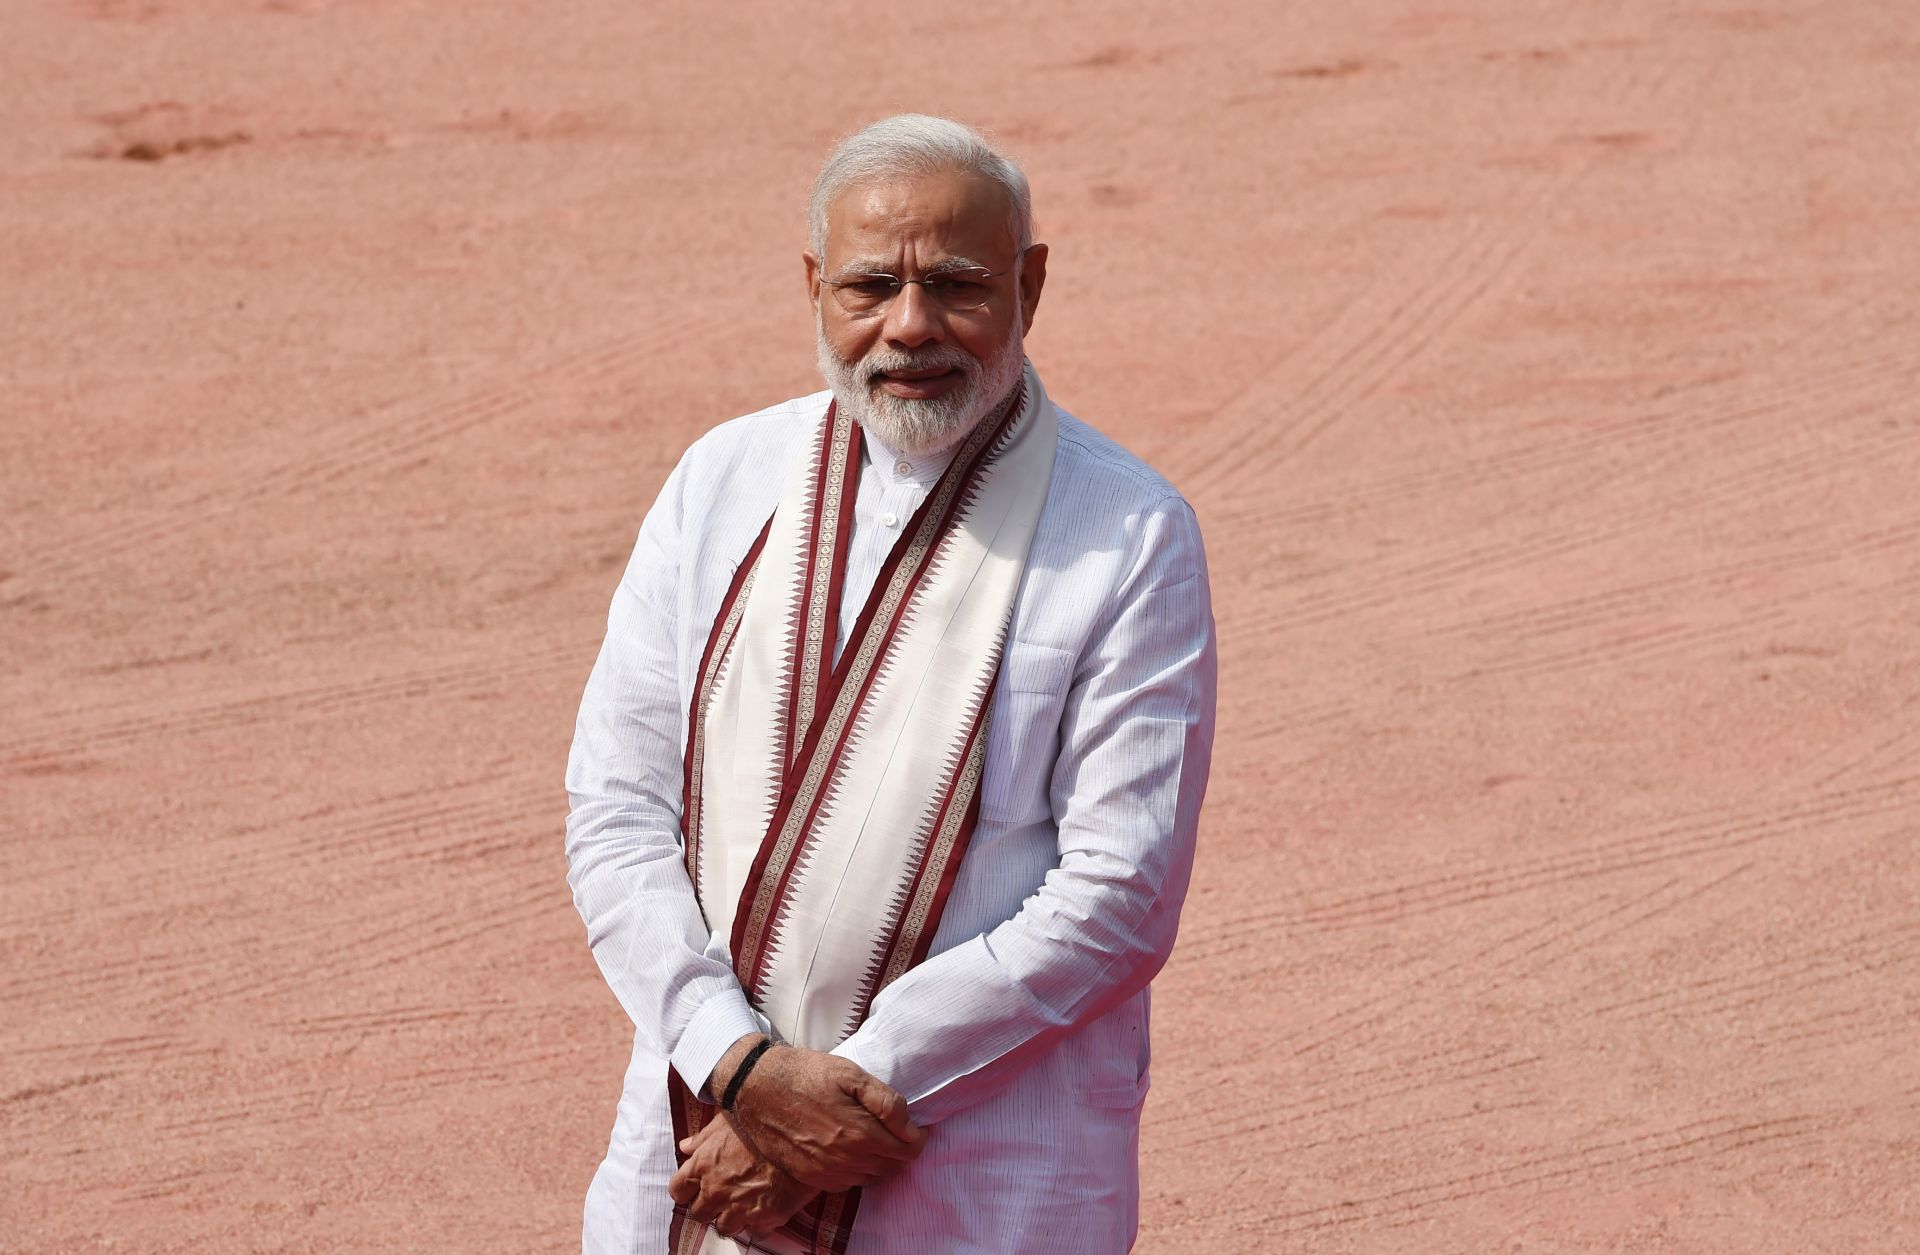 Indian Prime Minister Narendra Modi, looking quite content with himself